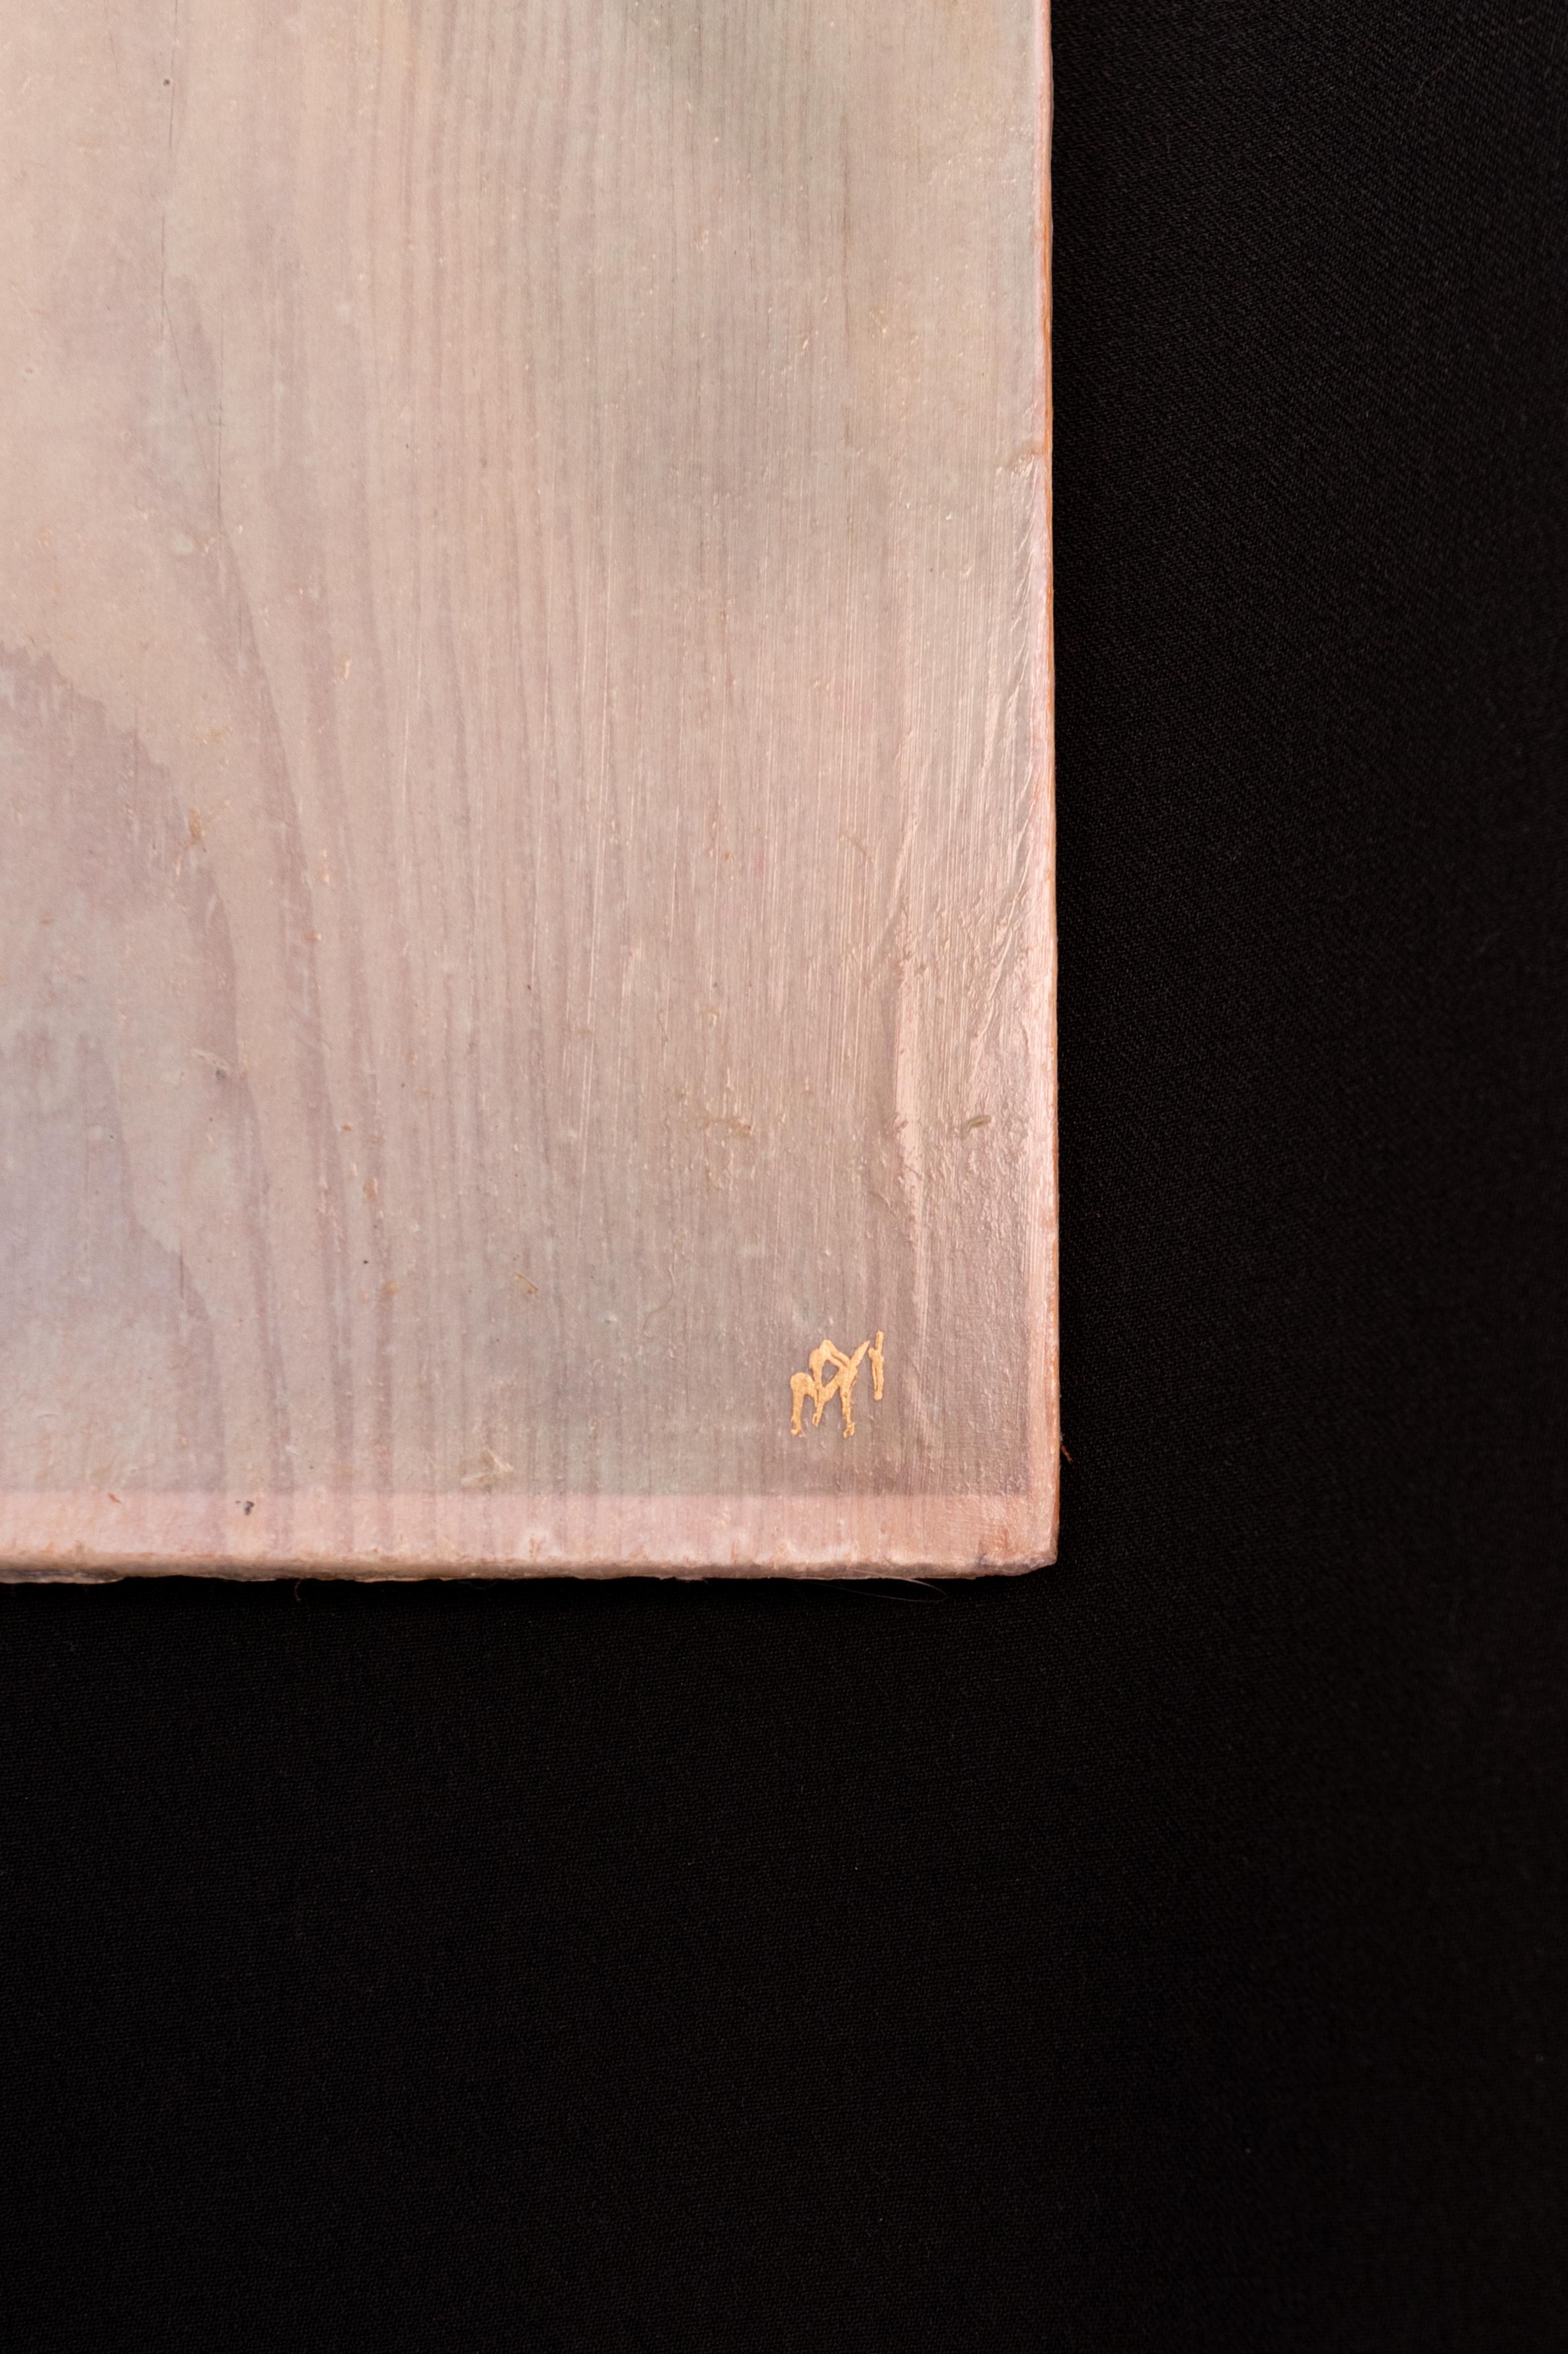 Photography on wooden panel, 'Judith' (dancing lady) (2022), by Maarten Marchau 3